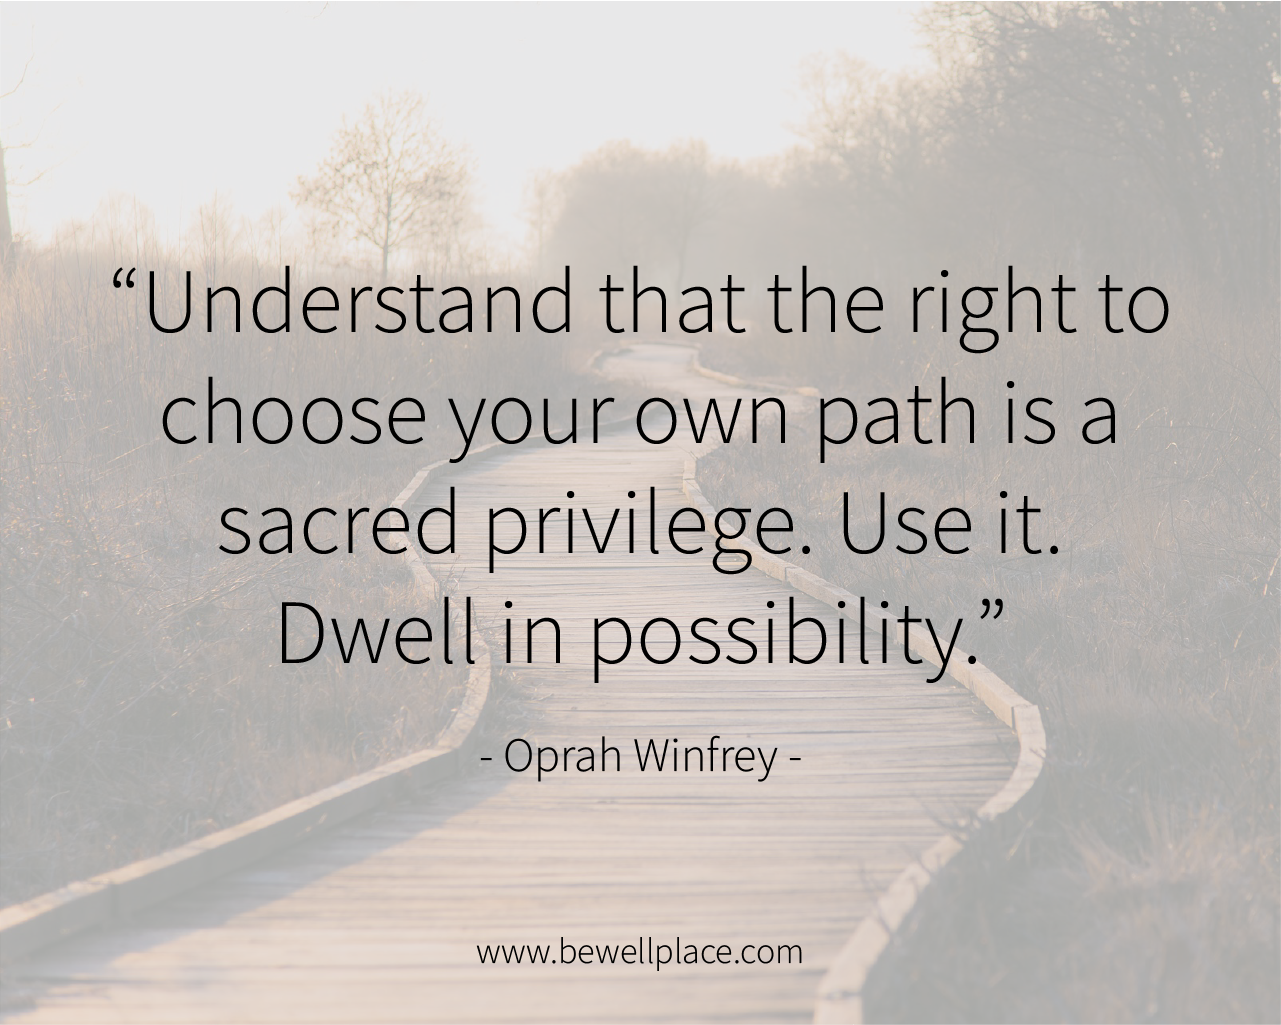 Understand that right to choose your own path is a sacred privilege. Use it. Dwell in possibility. - Oprah Winfrey